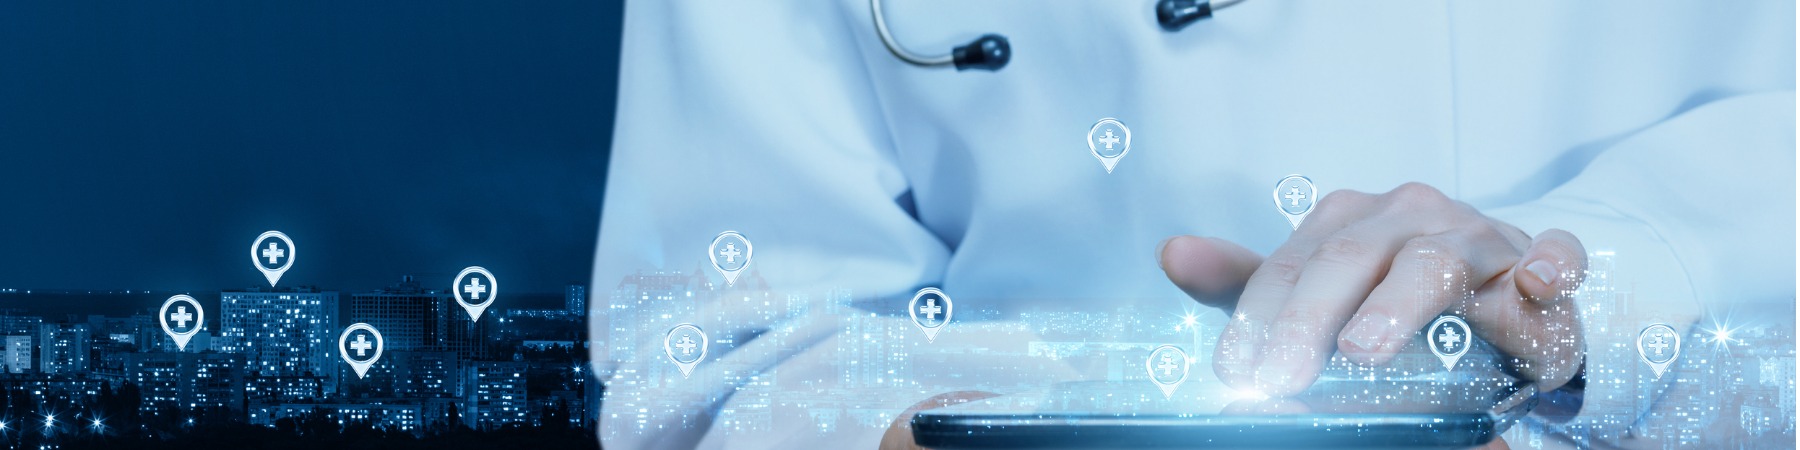 doctor-working-at-the-medical-network-on-the-tablet- 1800 x 500